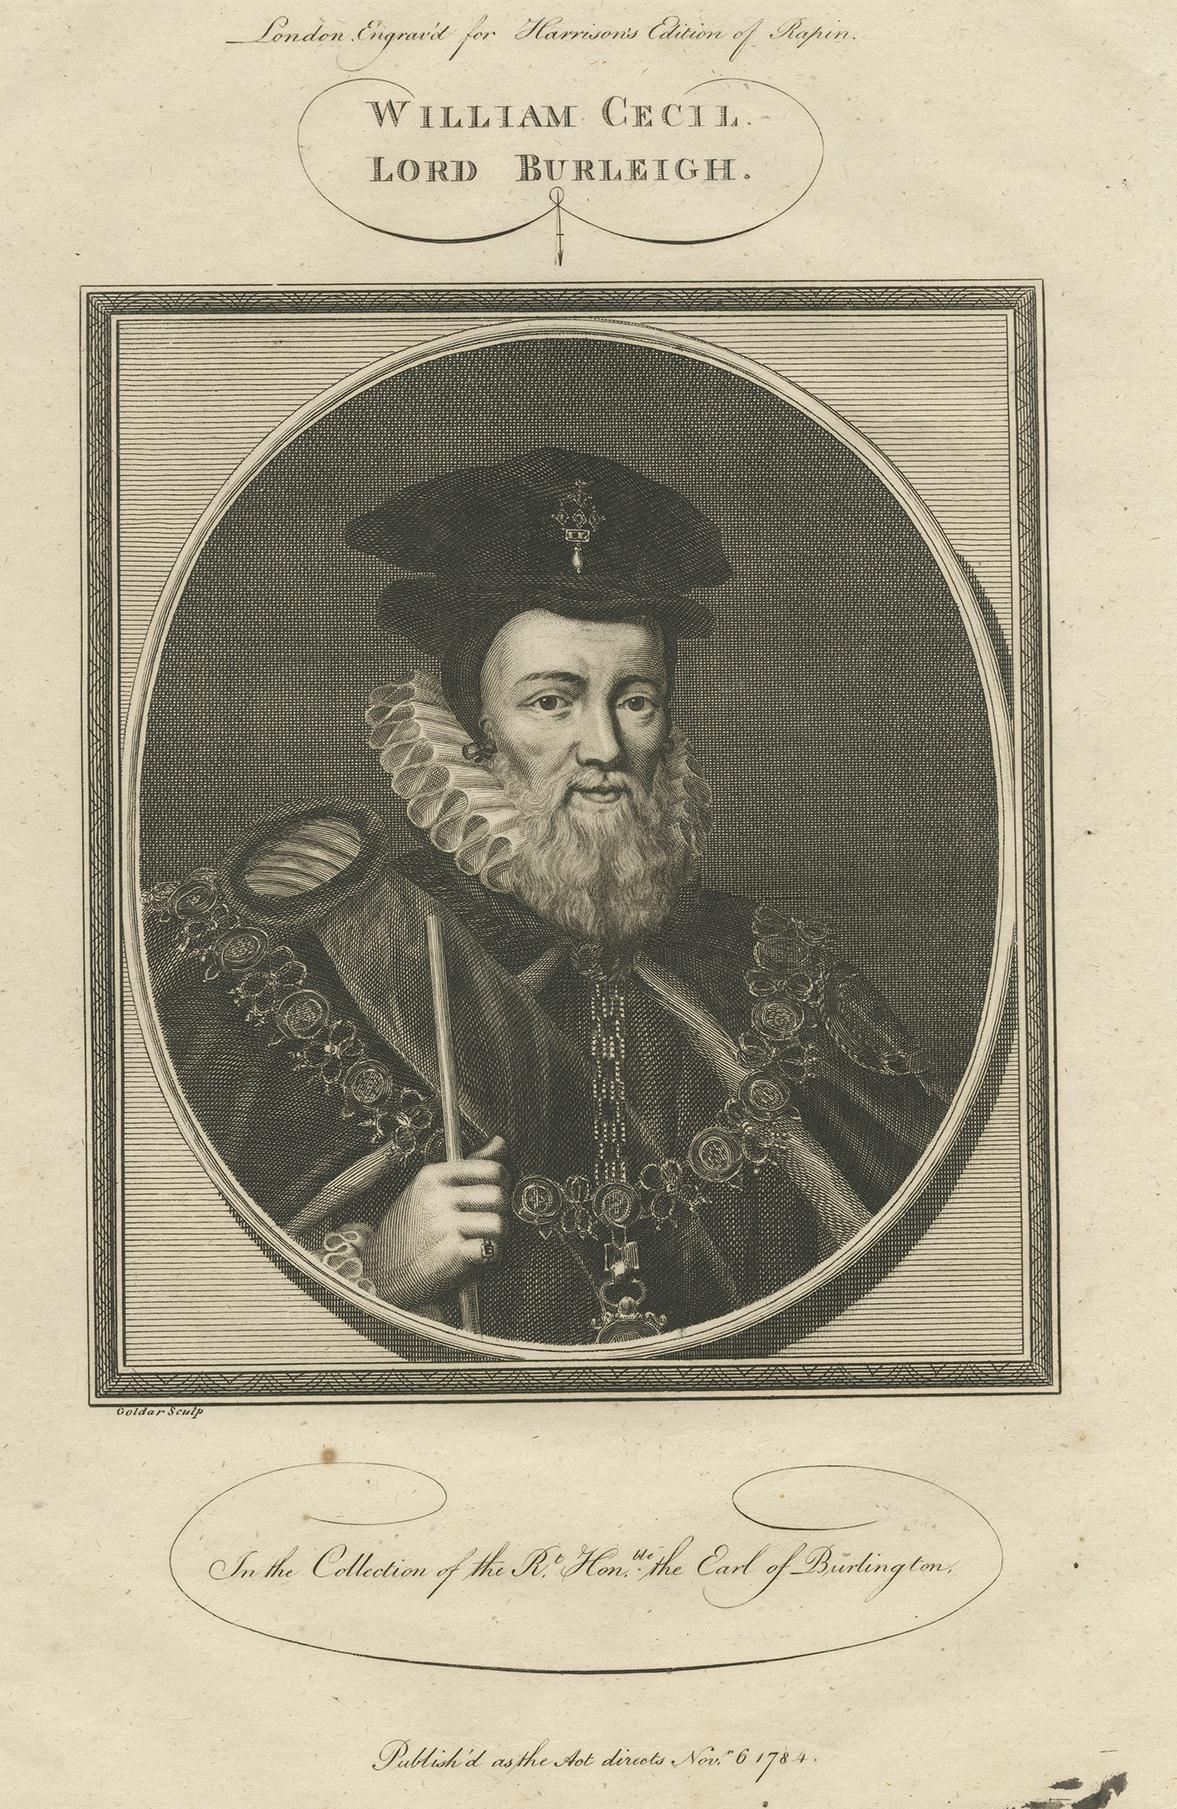 Antique print titled 'William Cecil Lord Burleigh'. William Cecil, 1st Baron Burghley. Engraved by John Goldar (1729–1795) from an earlier portrait.